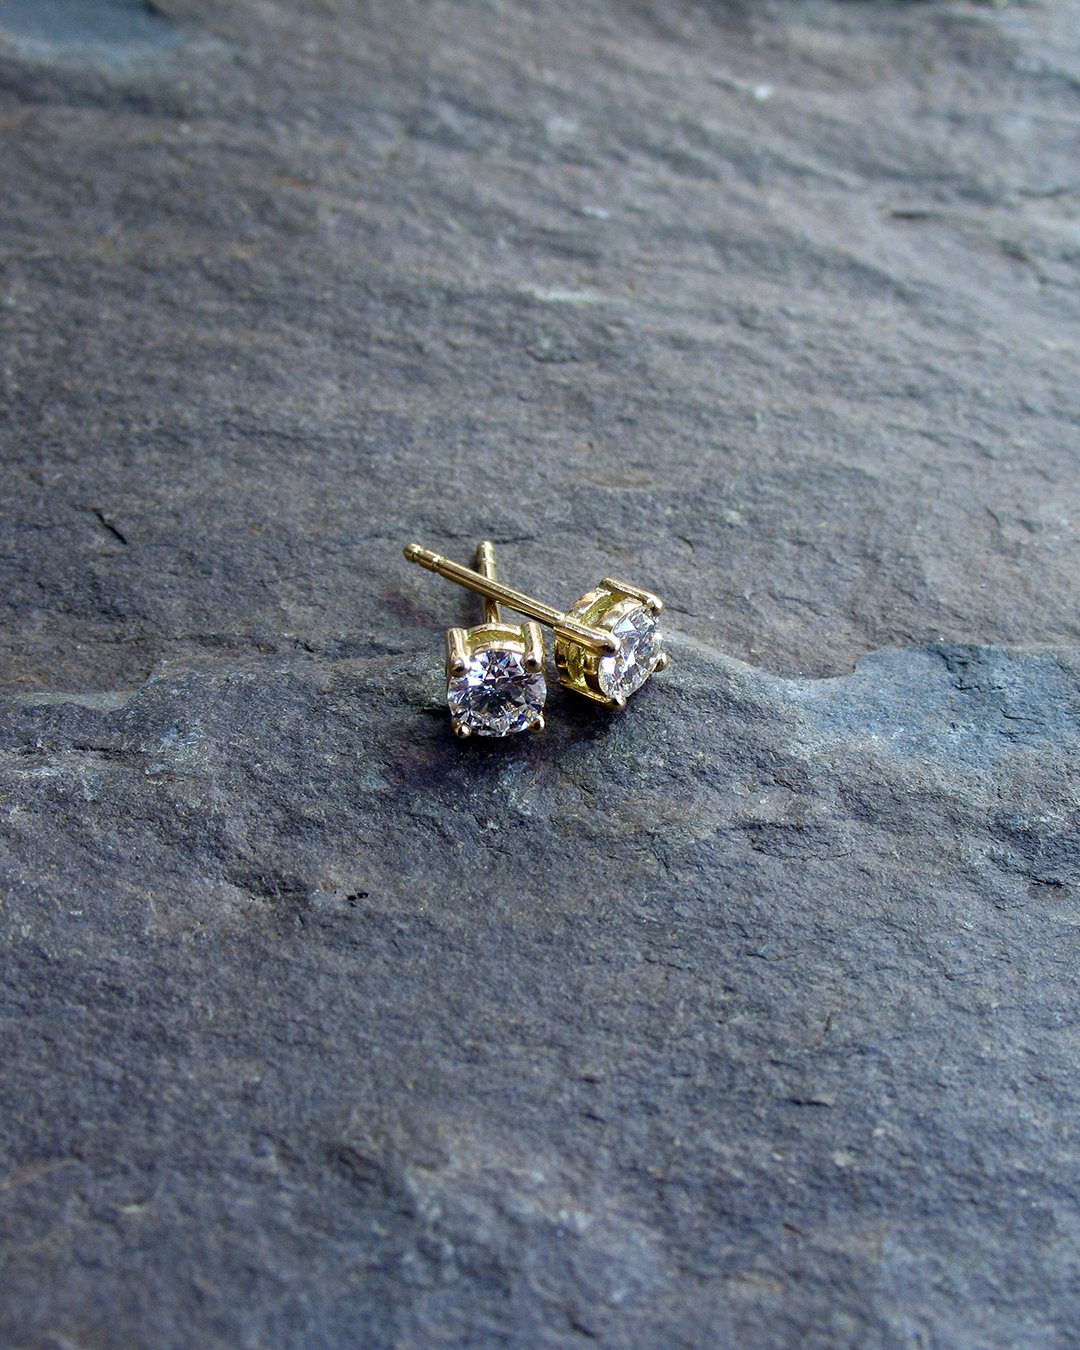 A classic pair of yellow gold diamond stud earrings